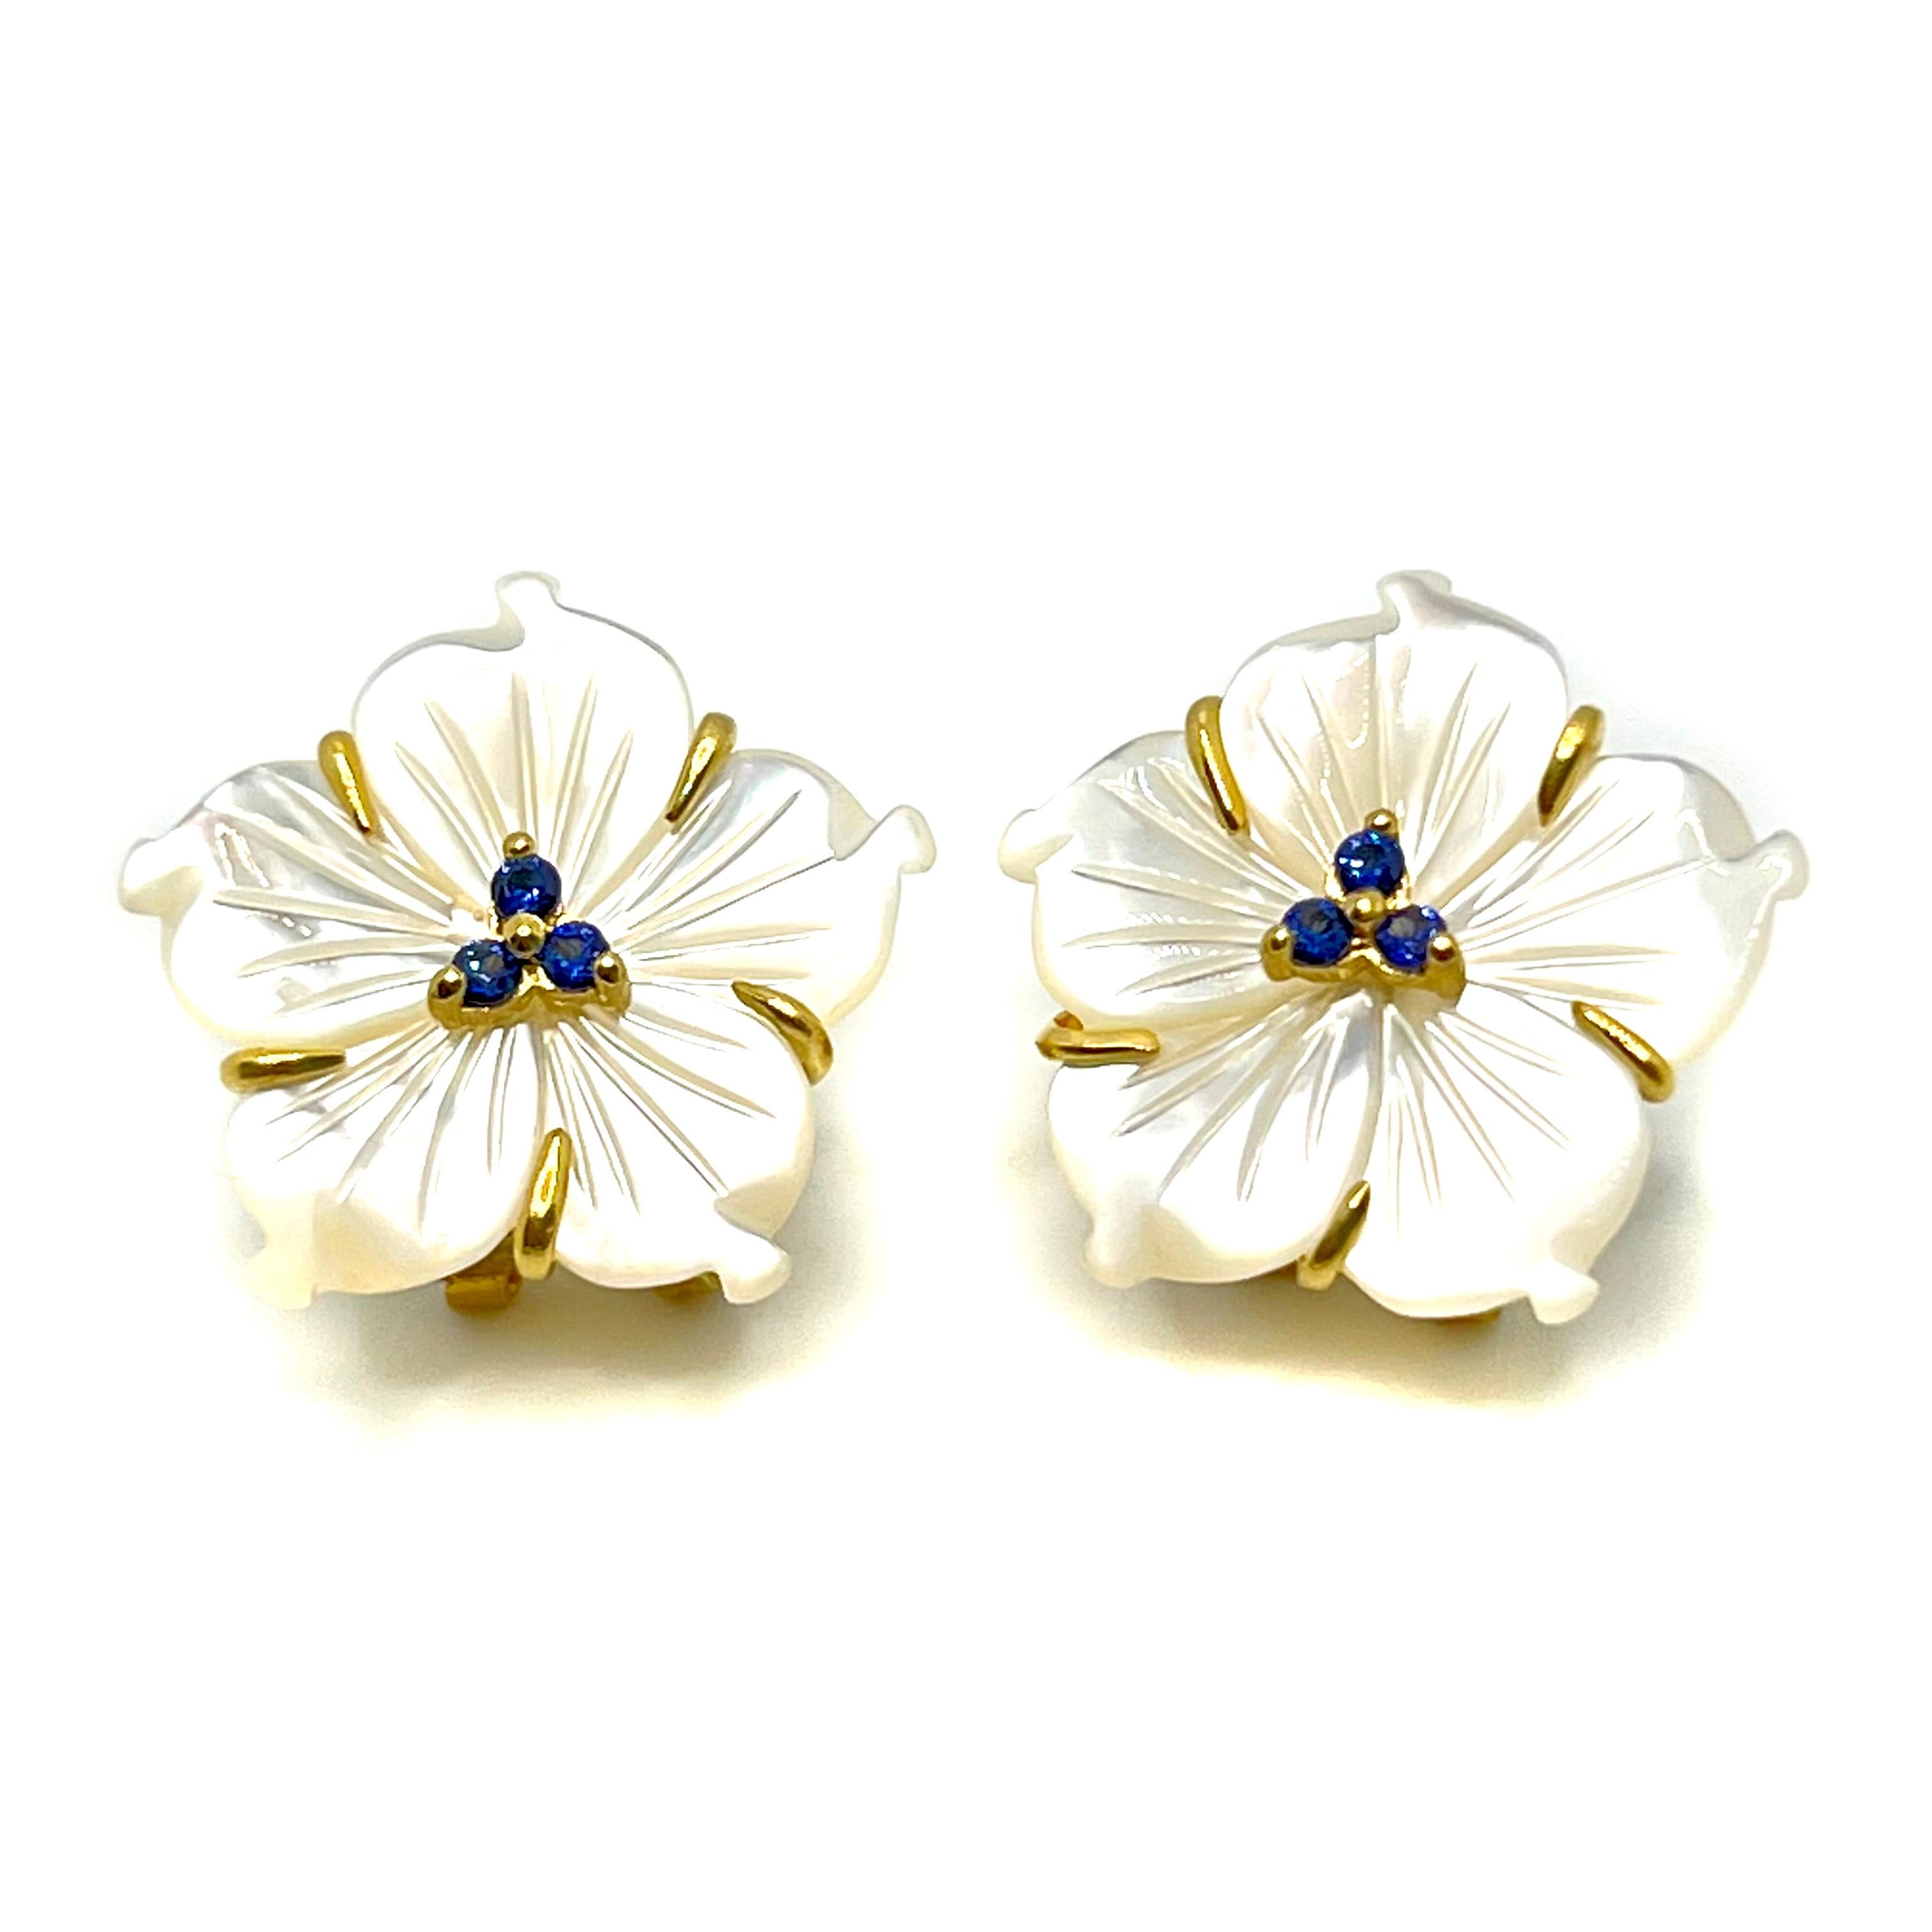 Elegant 23mm Carved Mother of Pearl Flower with lab-grown sapphire center Earrings

This gorgeous pair of earrings features 23mm mother of pearl carved into beautiful 3D flower, adorned with round lab-grown blue sapphire in the center, handset in